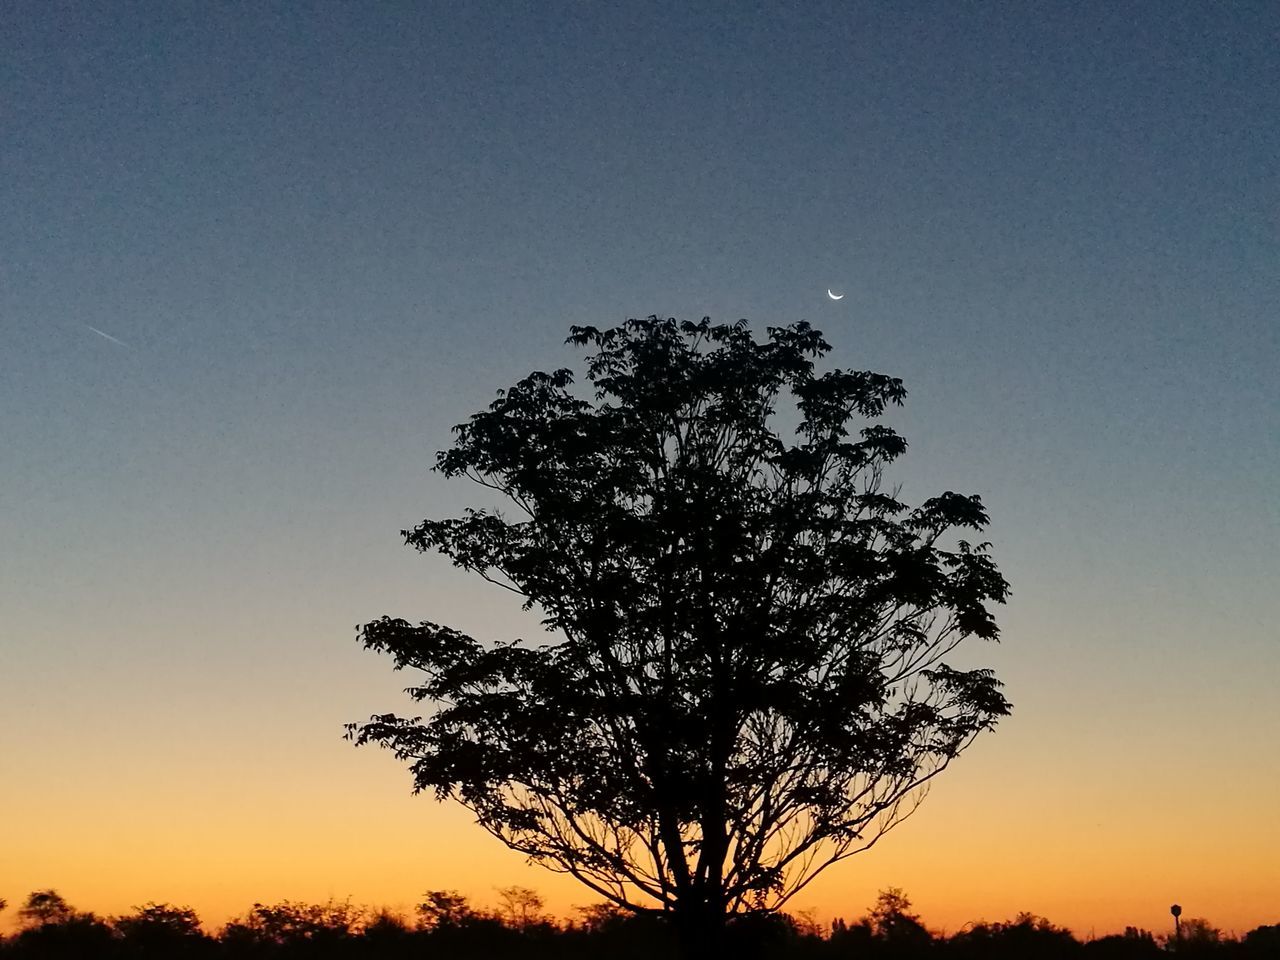 SILHOUETTE TREE ON LANDSCAPE AGAINST CLEAR SKY